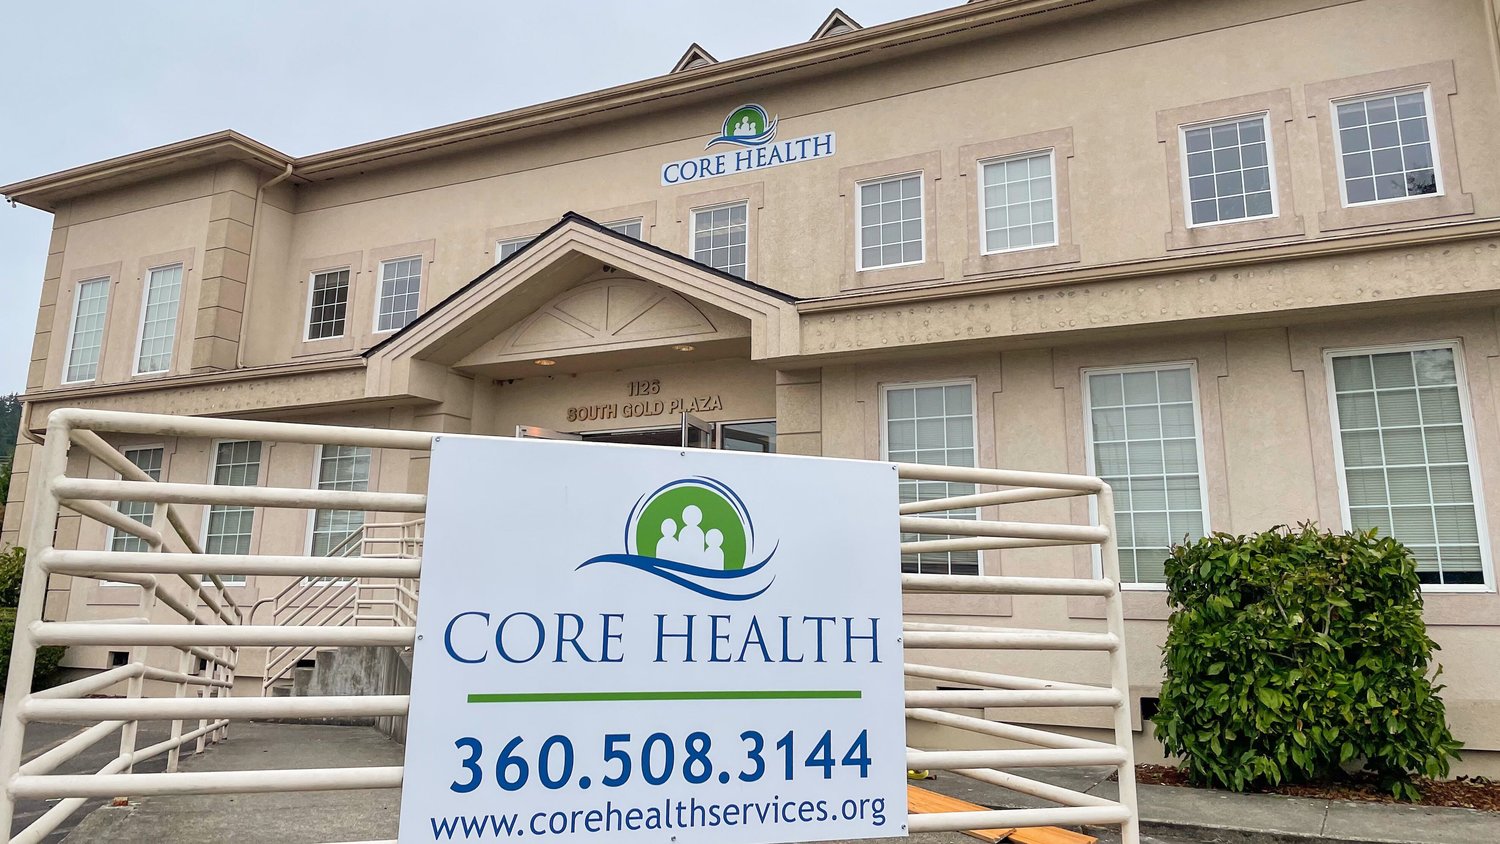 CORE Health is located at 1126 South Gold St. in Centralia.